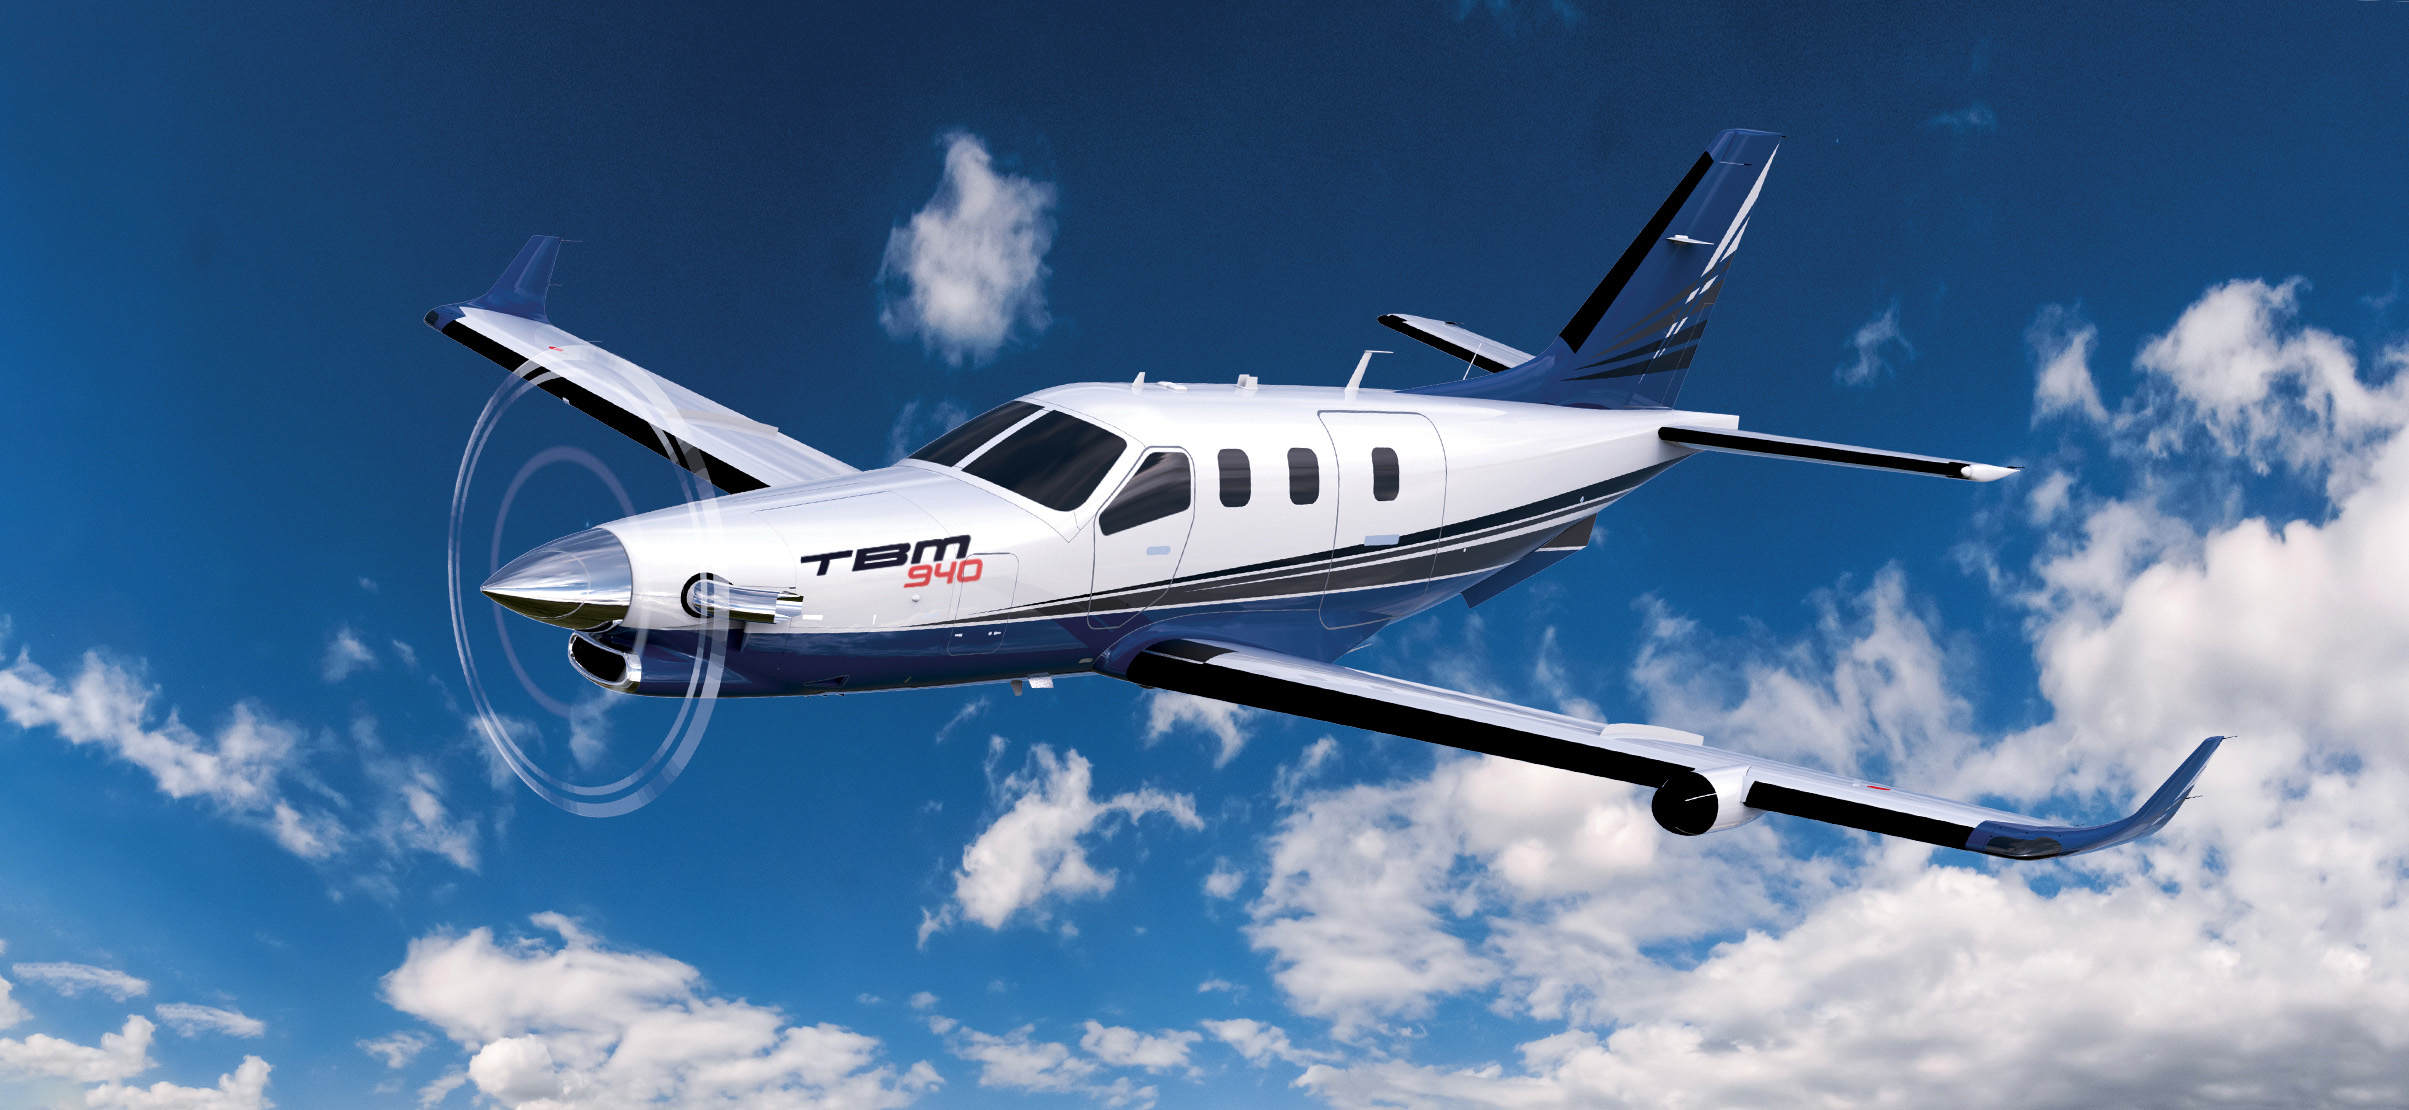 Daher announced the new top-of-the-line turboprop TBM 940 on March 7. Image courtesy of Daher. 